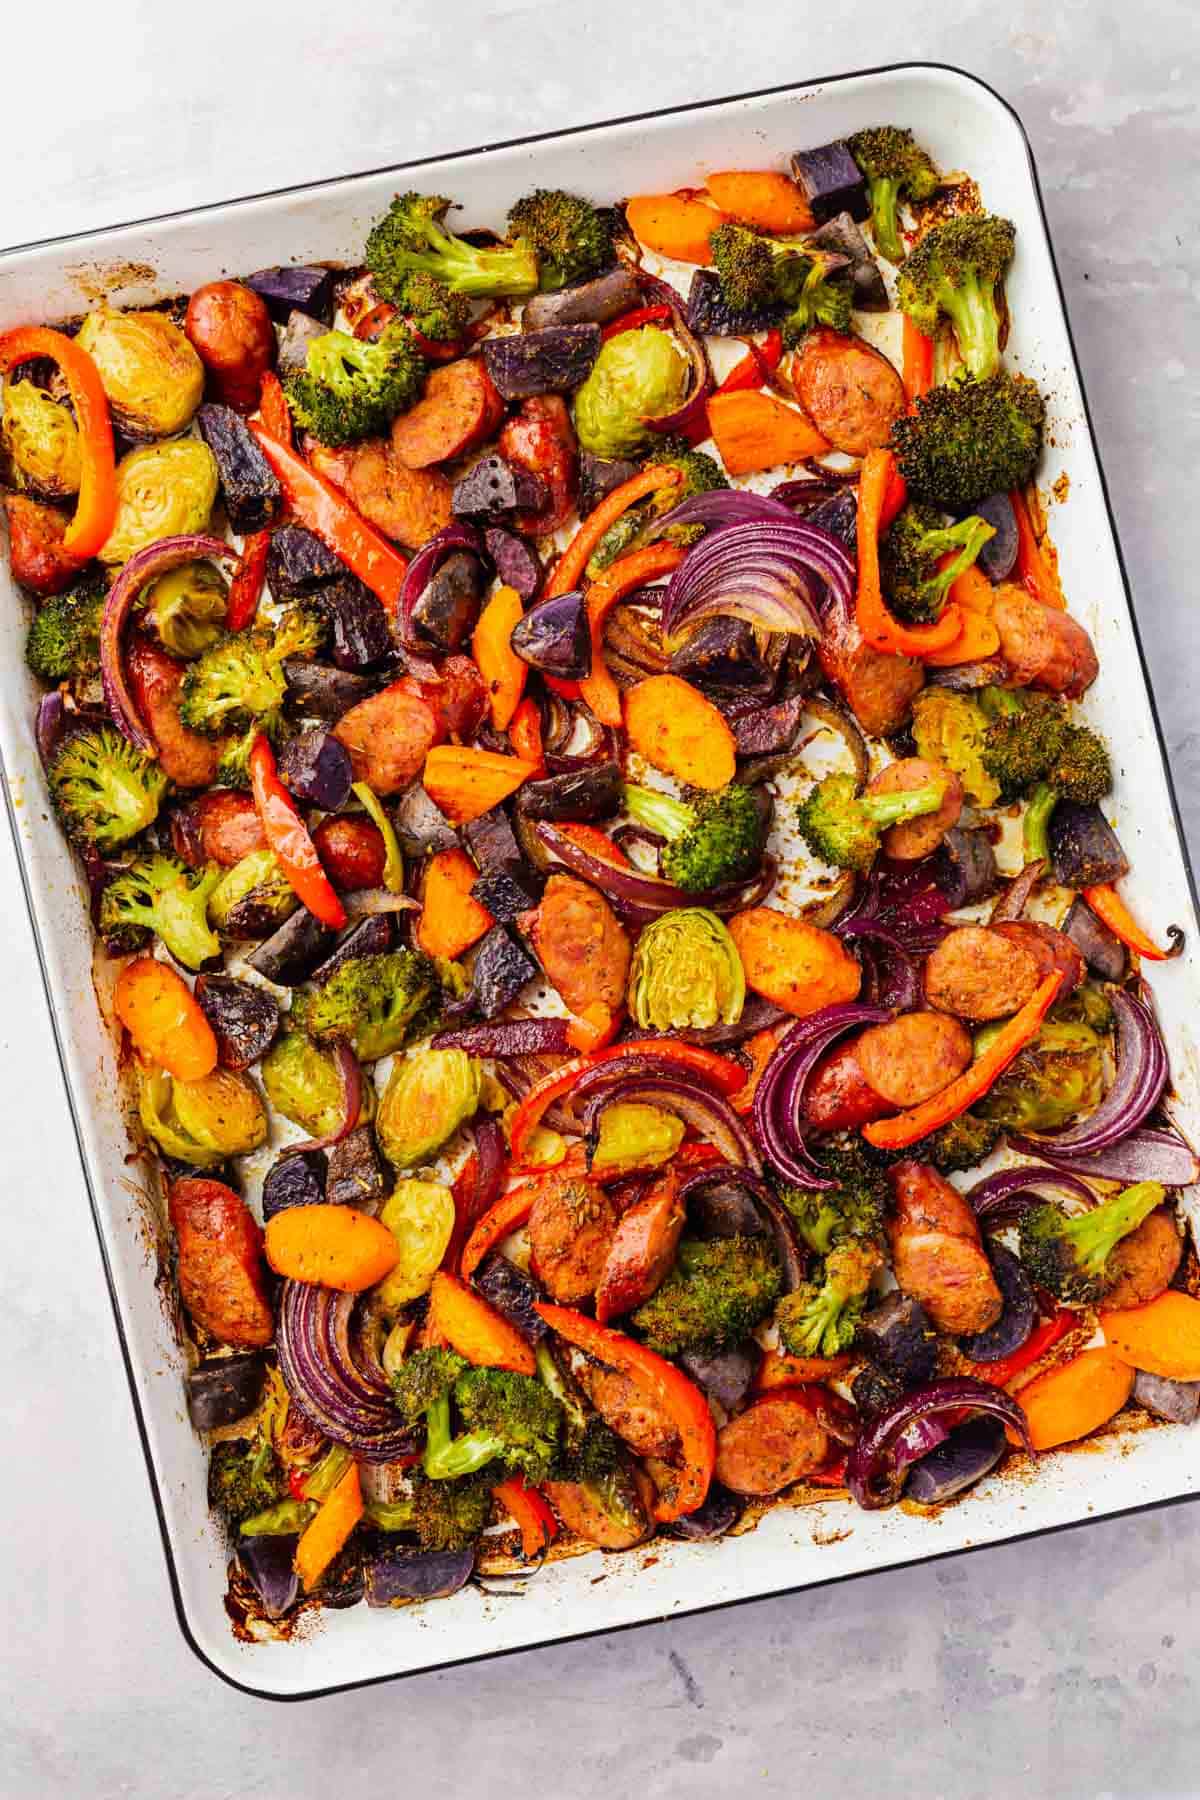 An overhead view of roasted sausage and vegetables on a white sheet pan after baking.